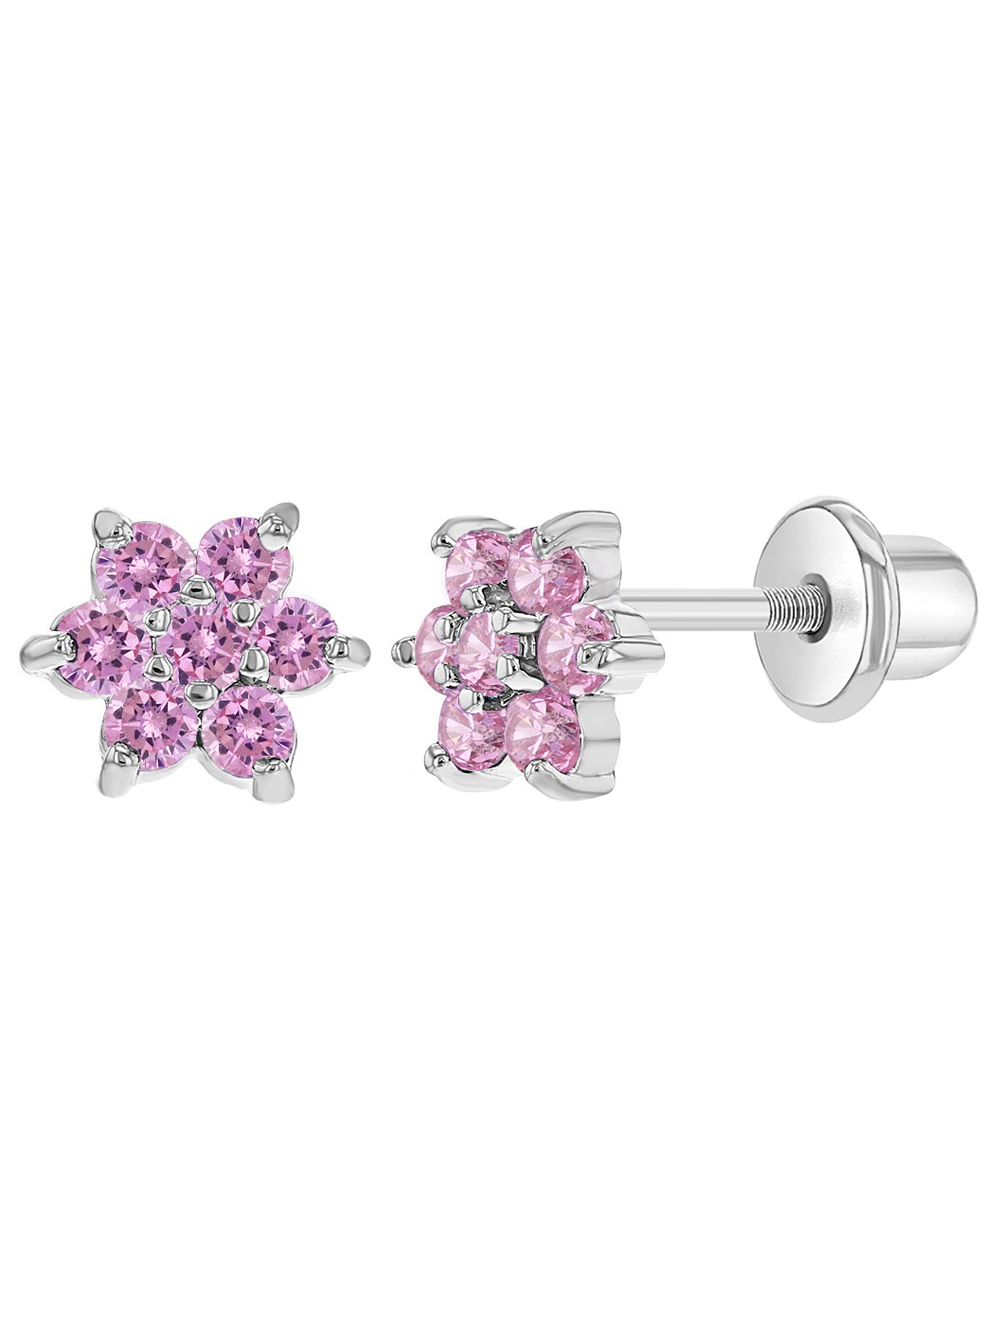 Rhodium Plated Pink Cubic Zirconia Flower Screw Back Earrings for Girls 5mm